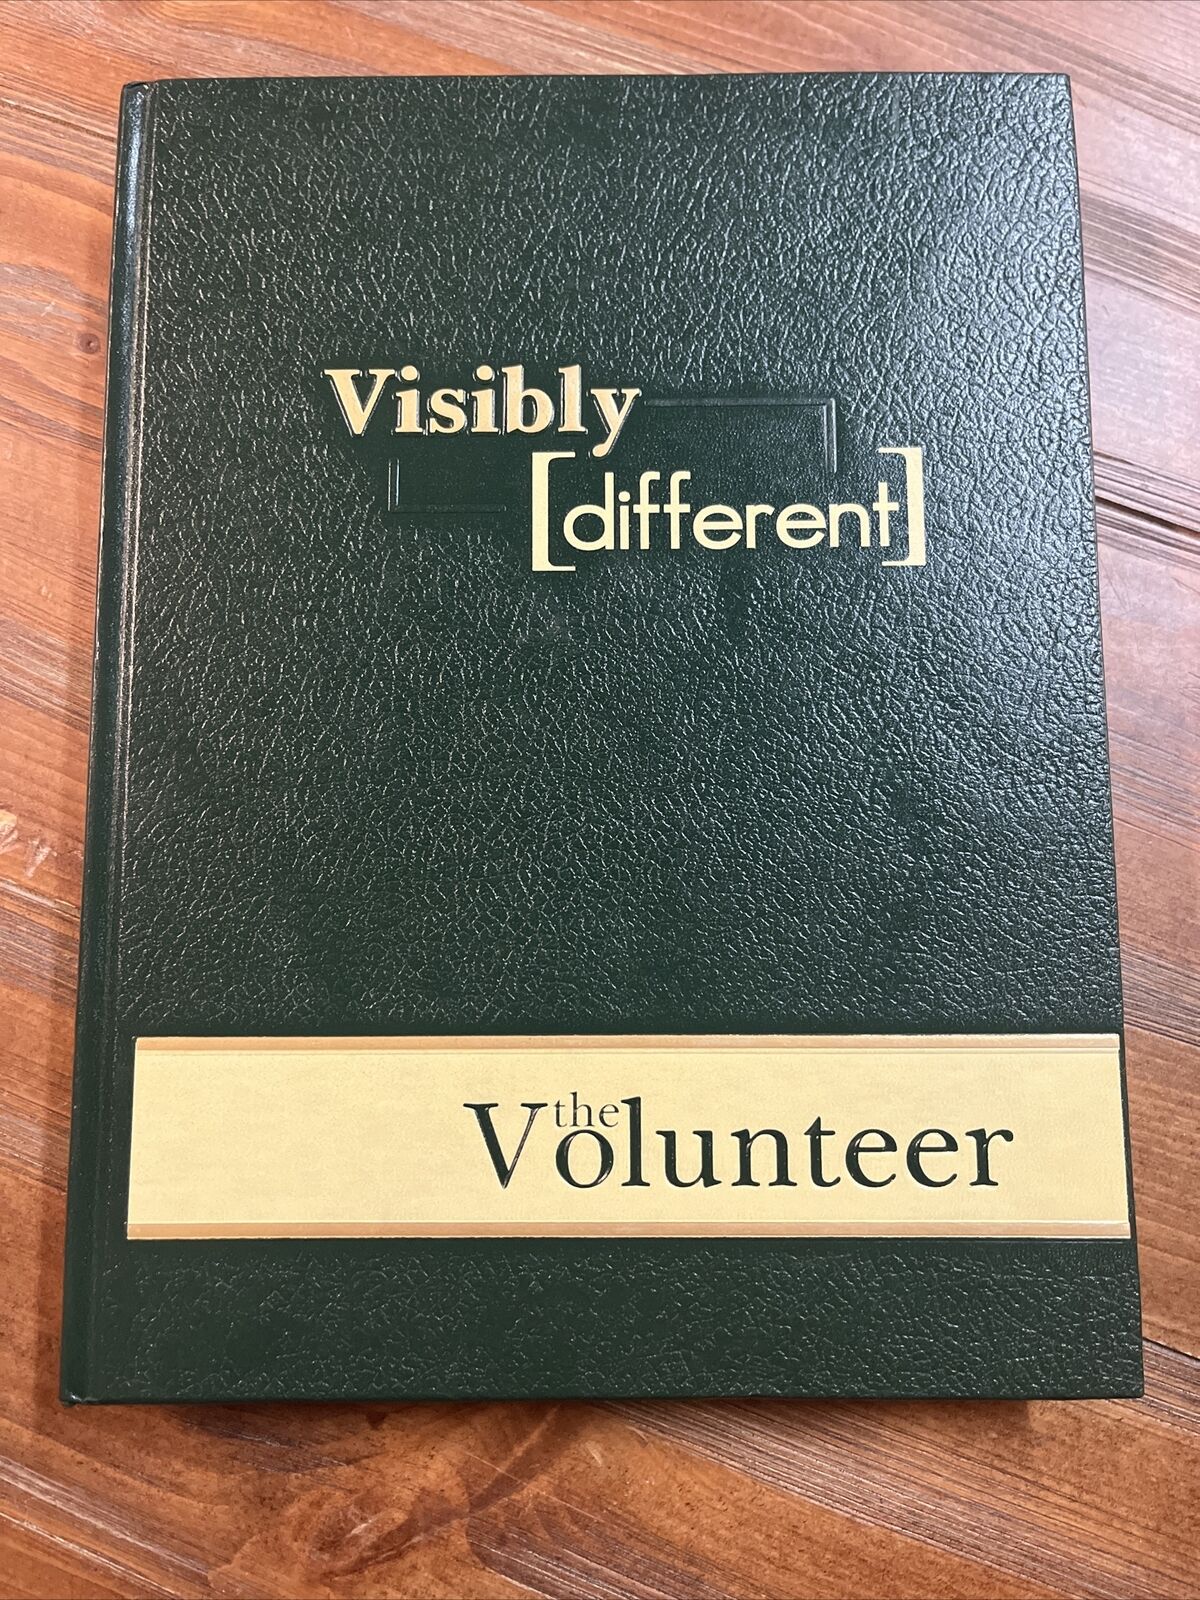 2005 University Of TennesseeYearbook Visibly Different Volunteers Knoxville